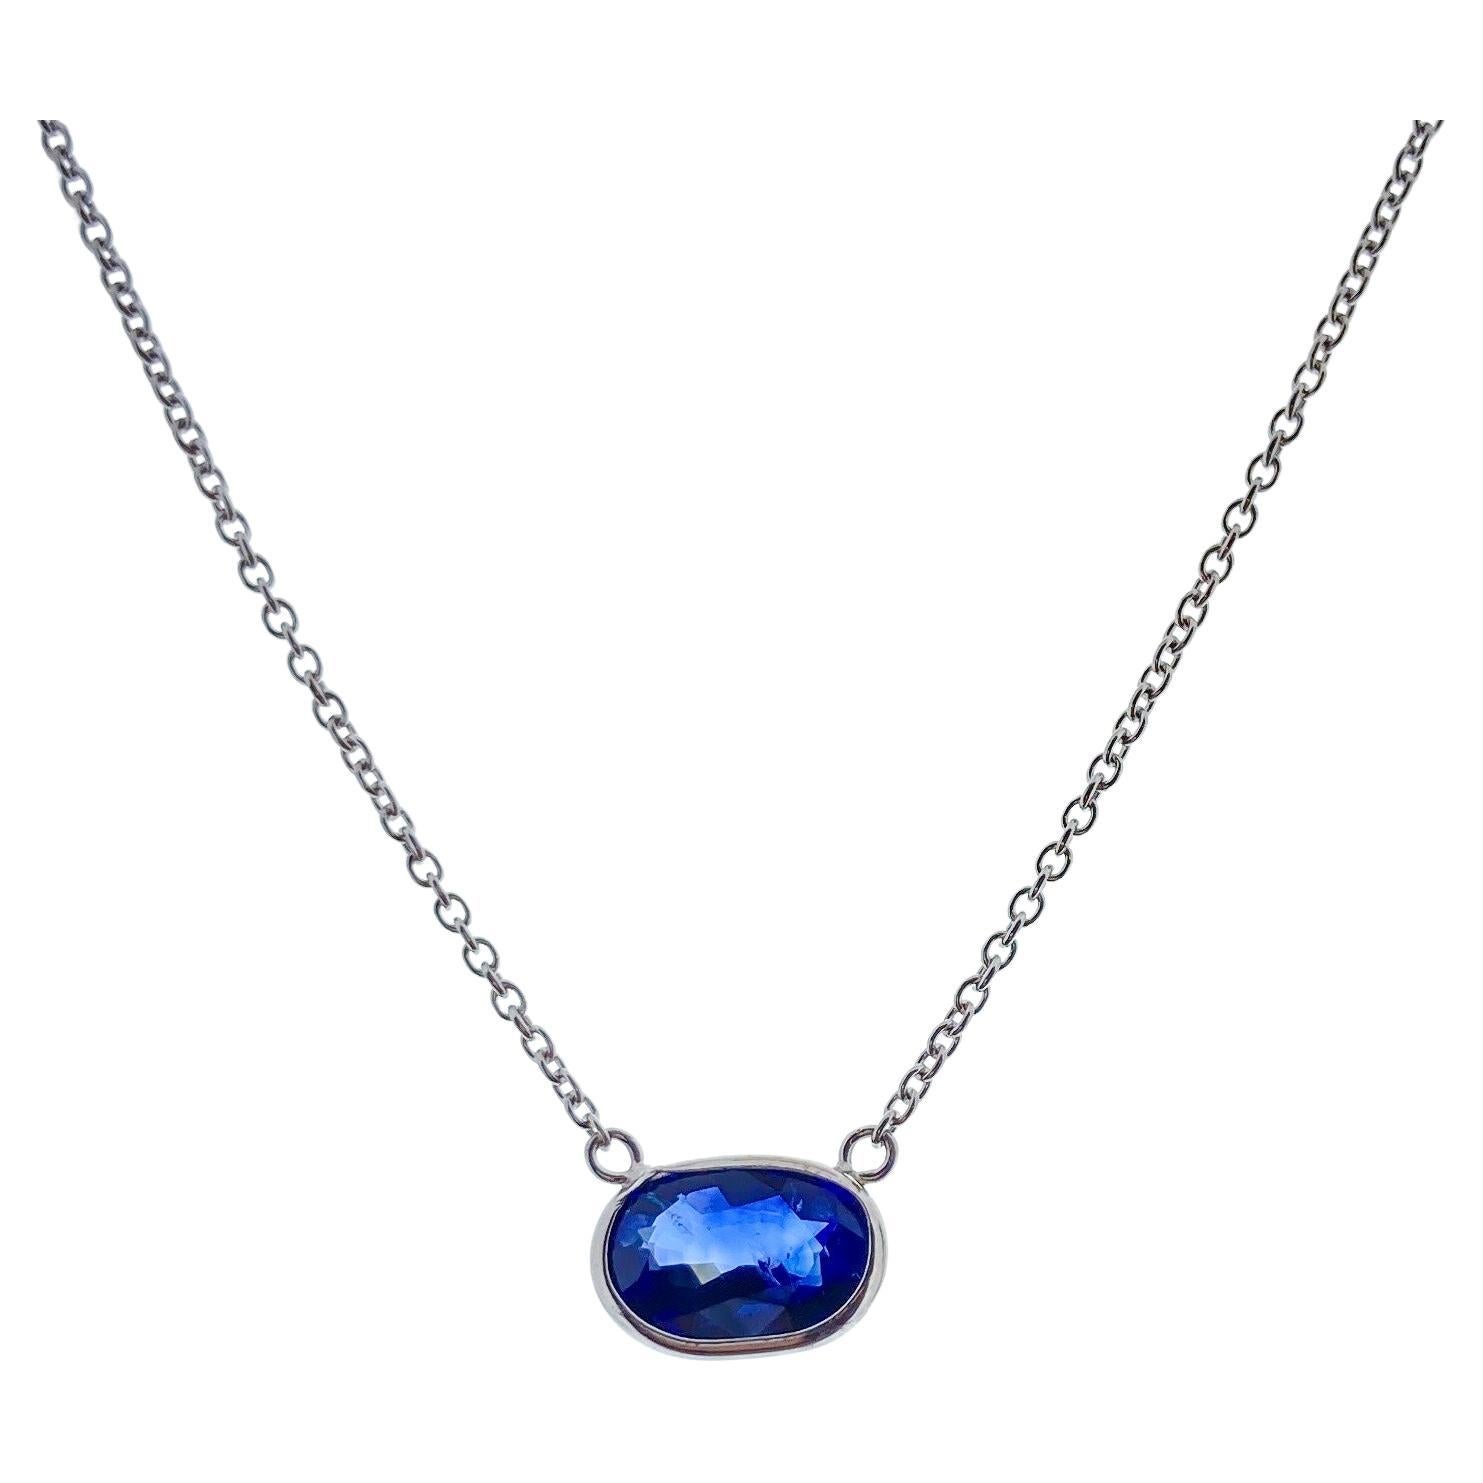 1.97 Carat Blue Oval Sapphire Fashion Necklaces In 14K White Gold  For Sale